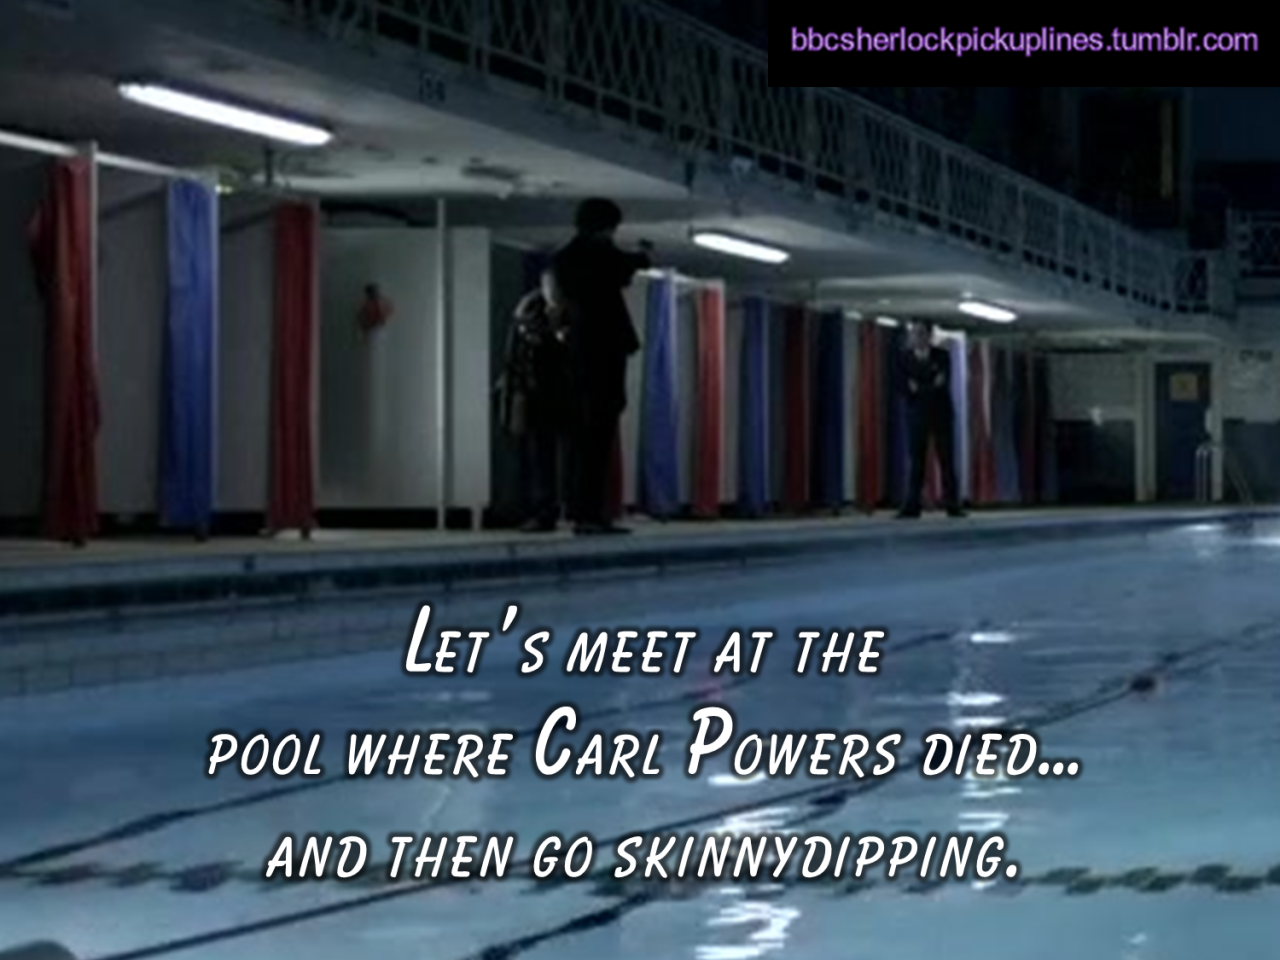 â€œLetâ€™s meet at the pool where Carl Powers died&hellip; and then